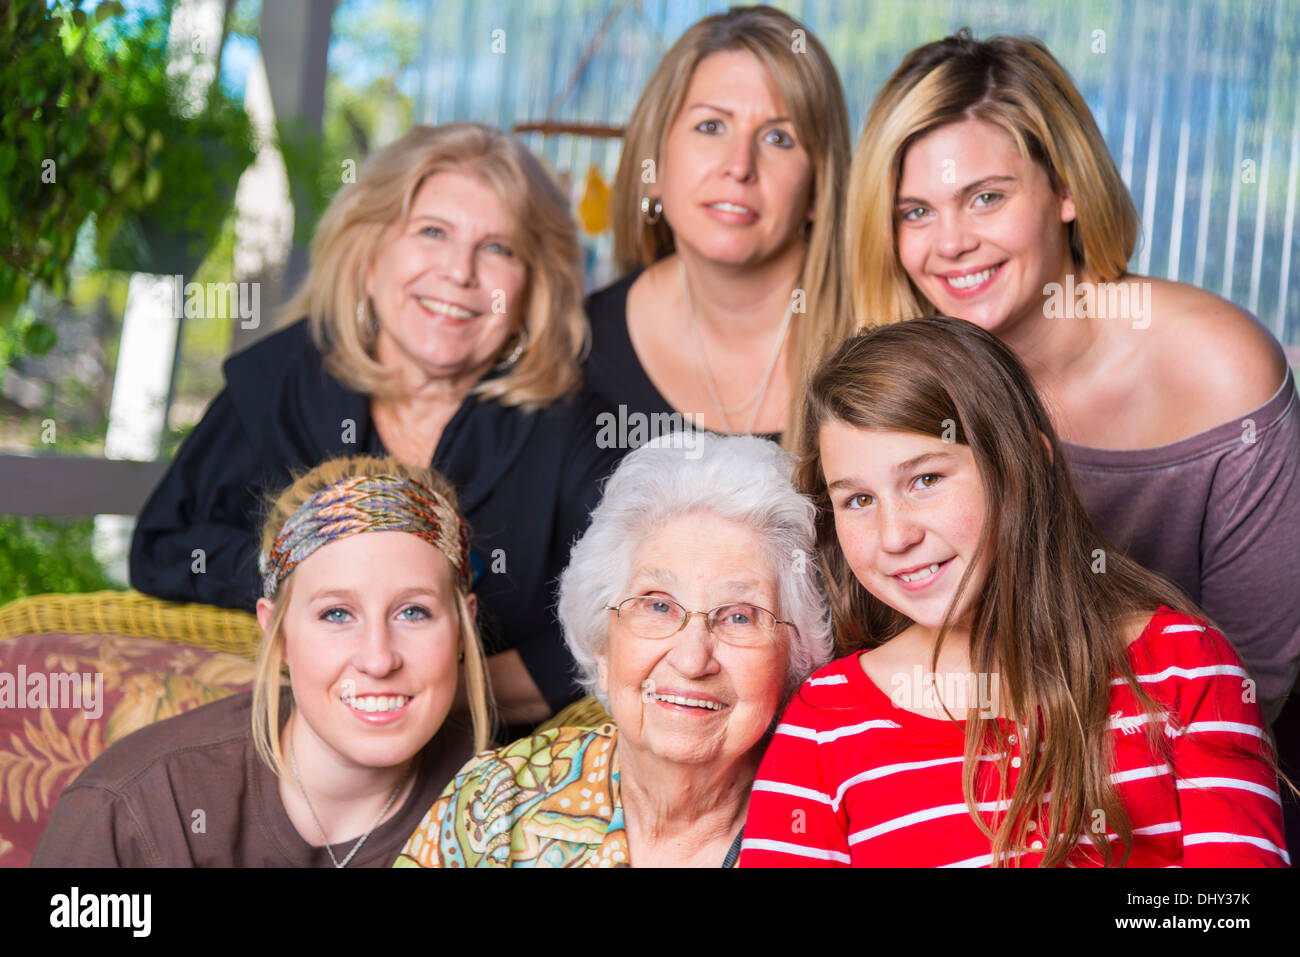 Family portrait of six women at ages from 11 to 93 years old Stock Photo